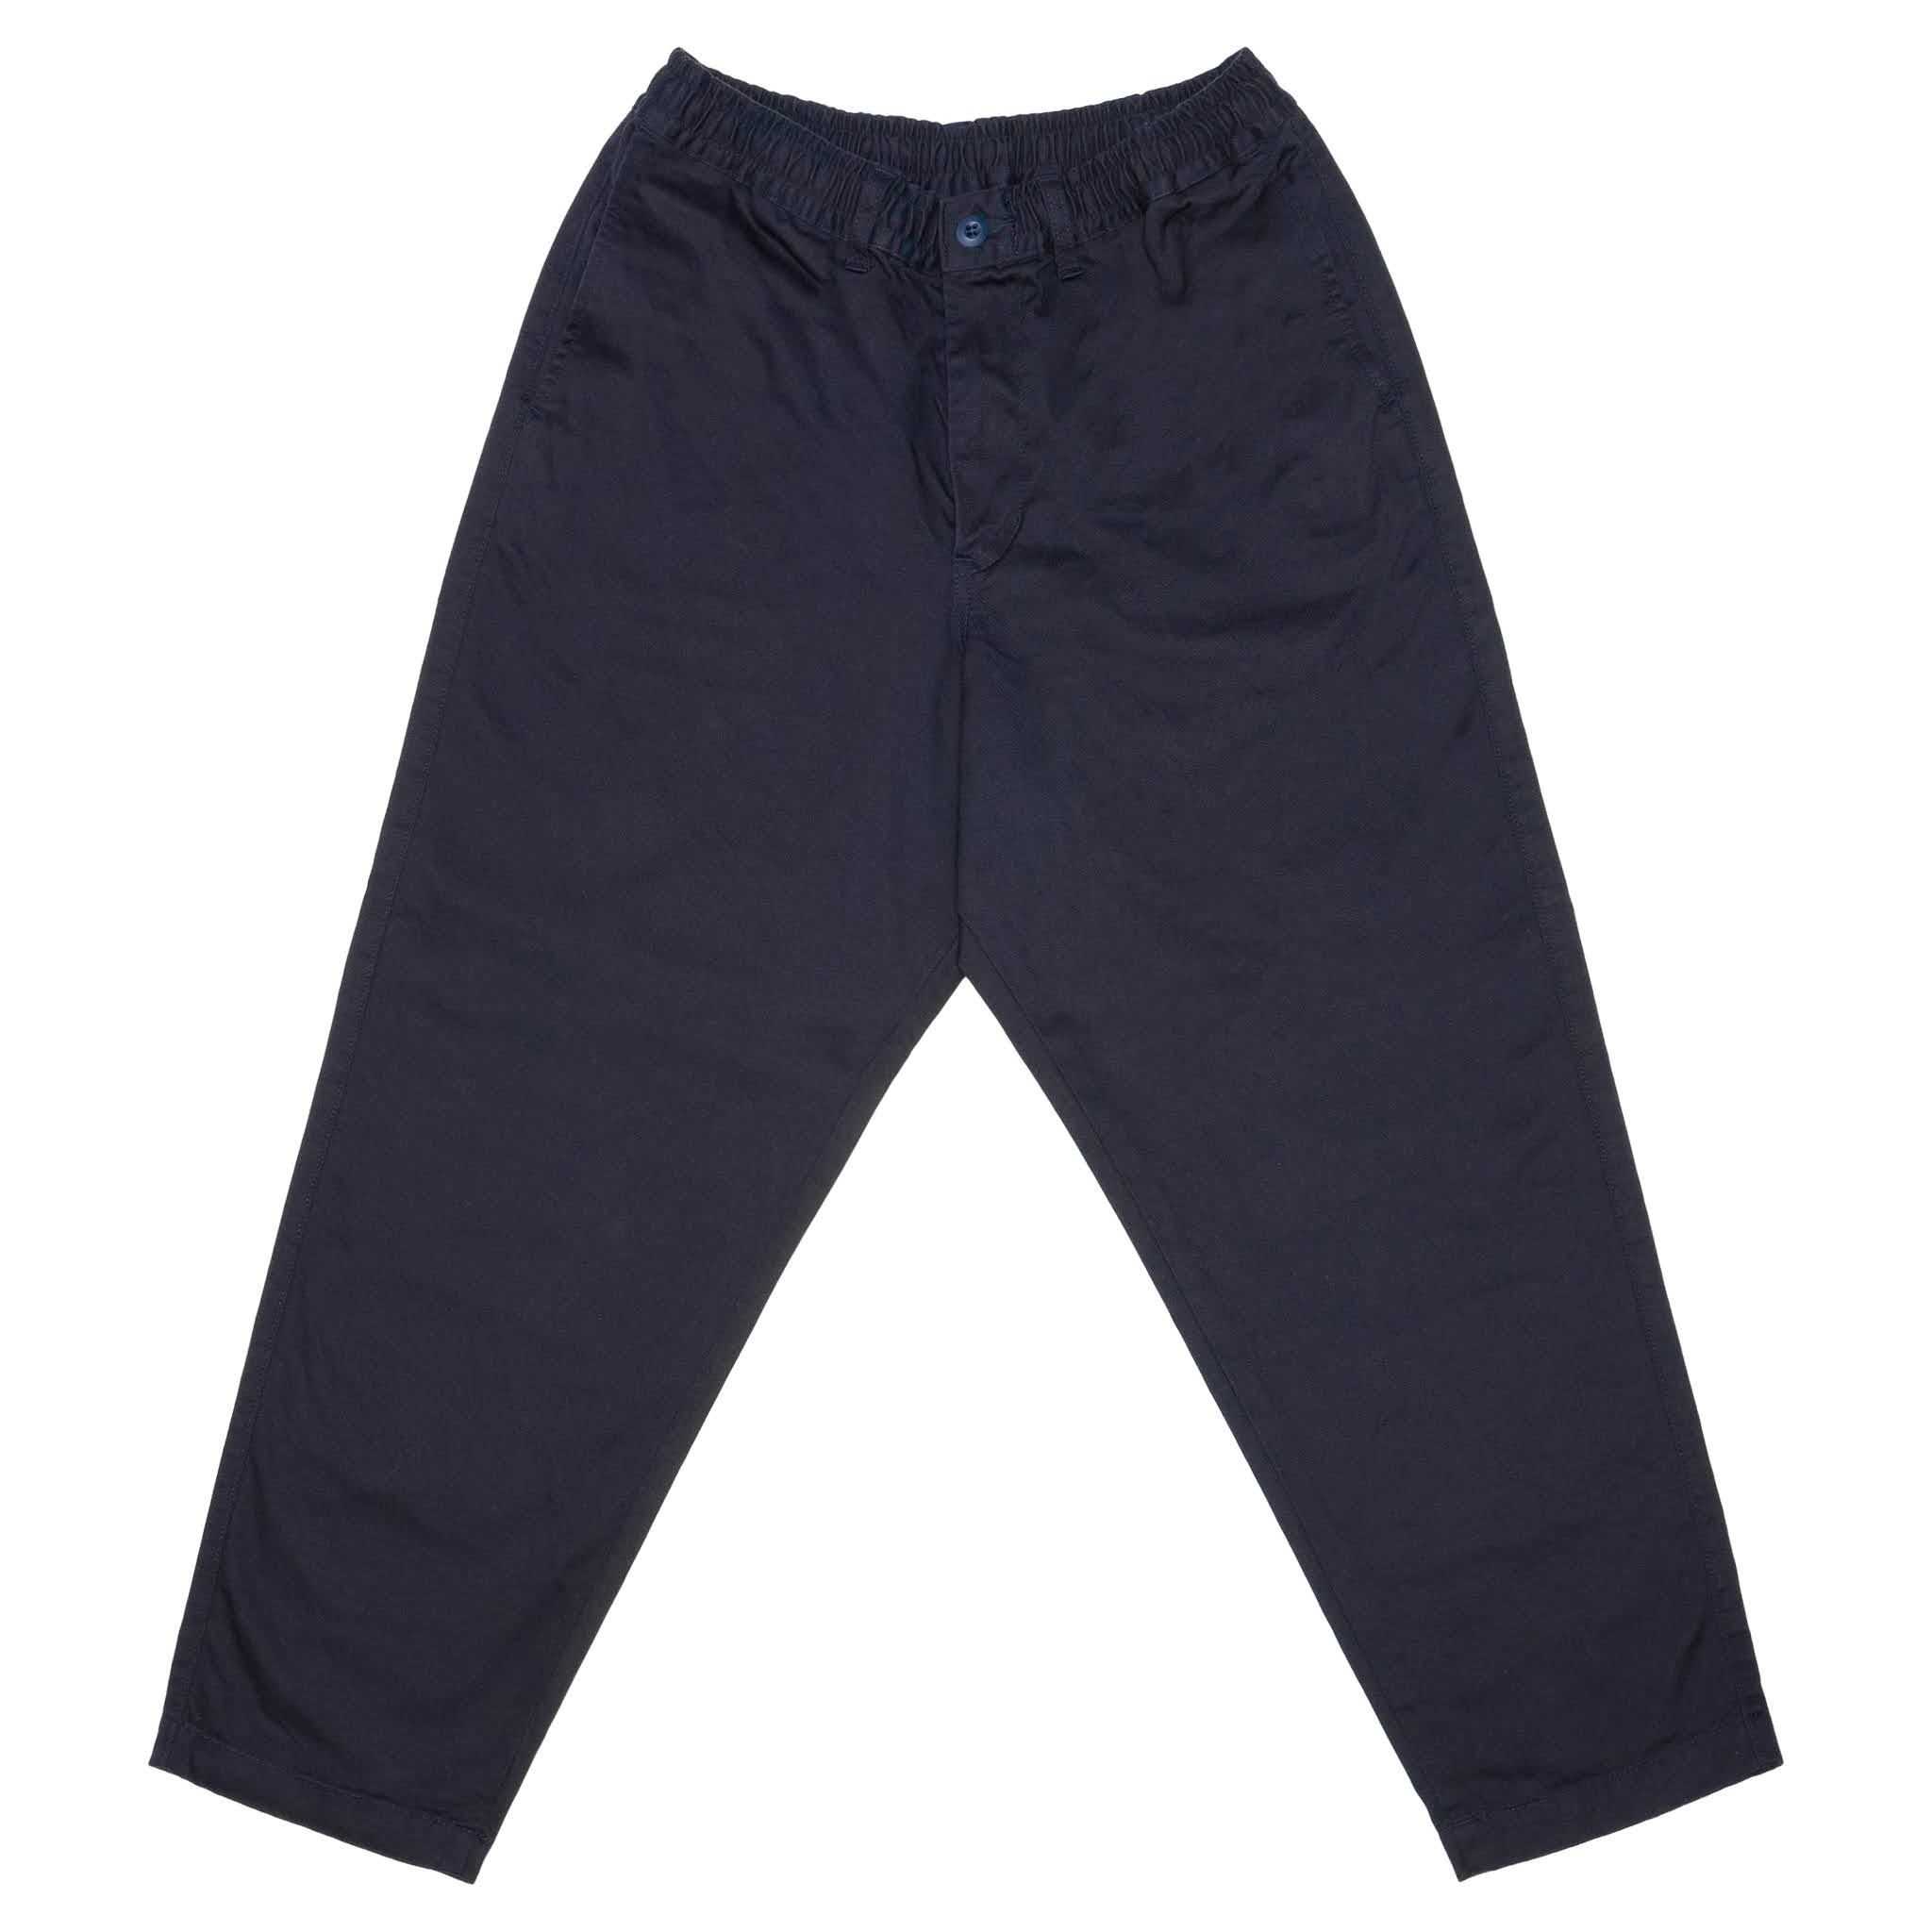 CUP AND CONE: Mild Tapered Easy Pants [Restock]